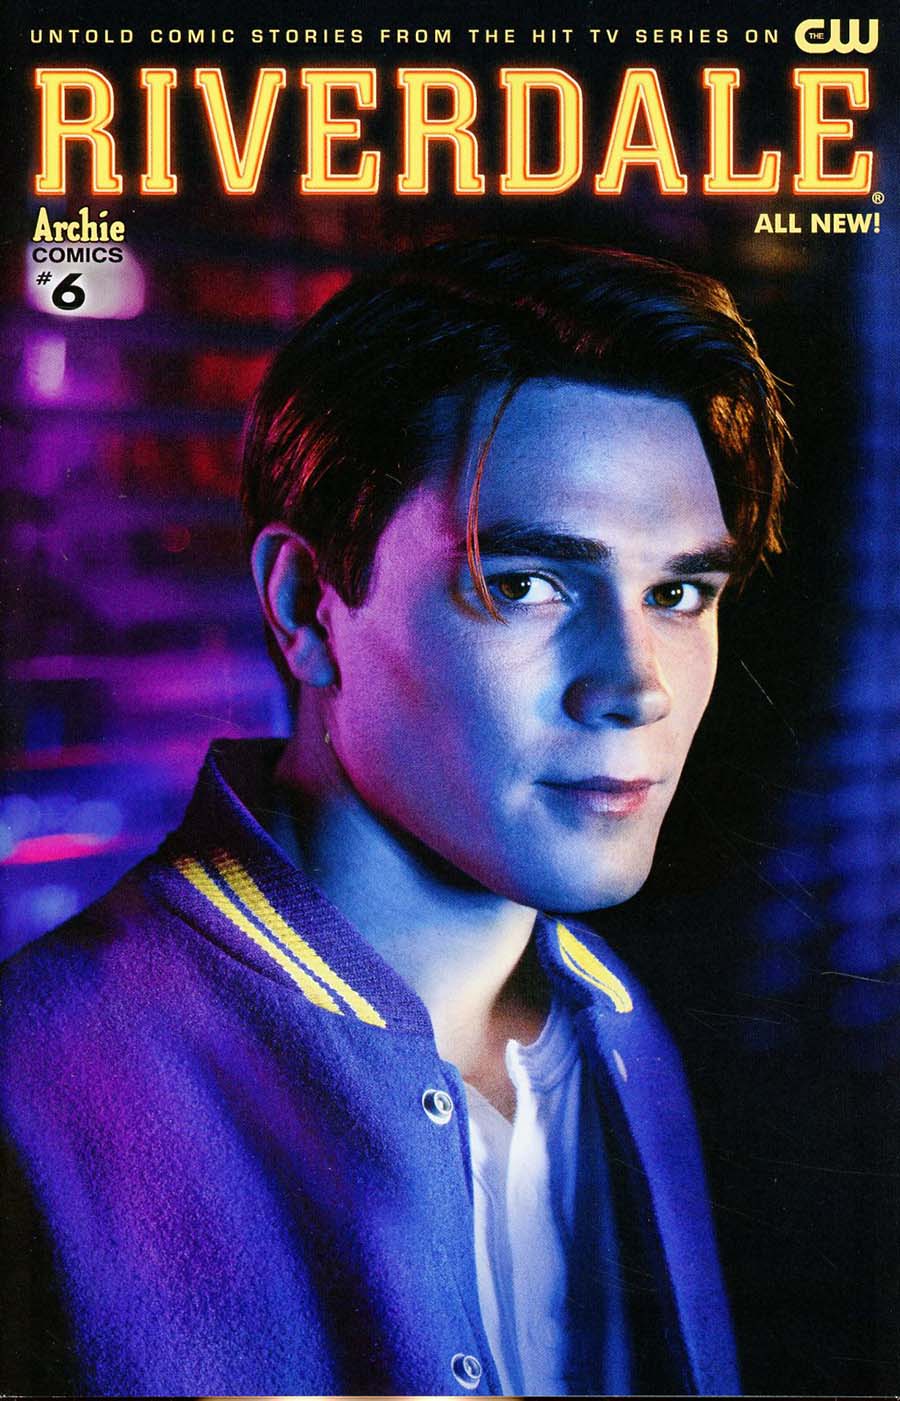 Riverdale #6 Cover A Regular CW Photo Cover